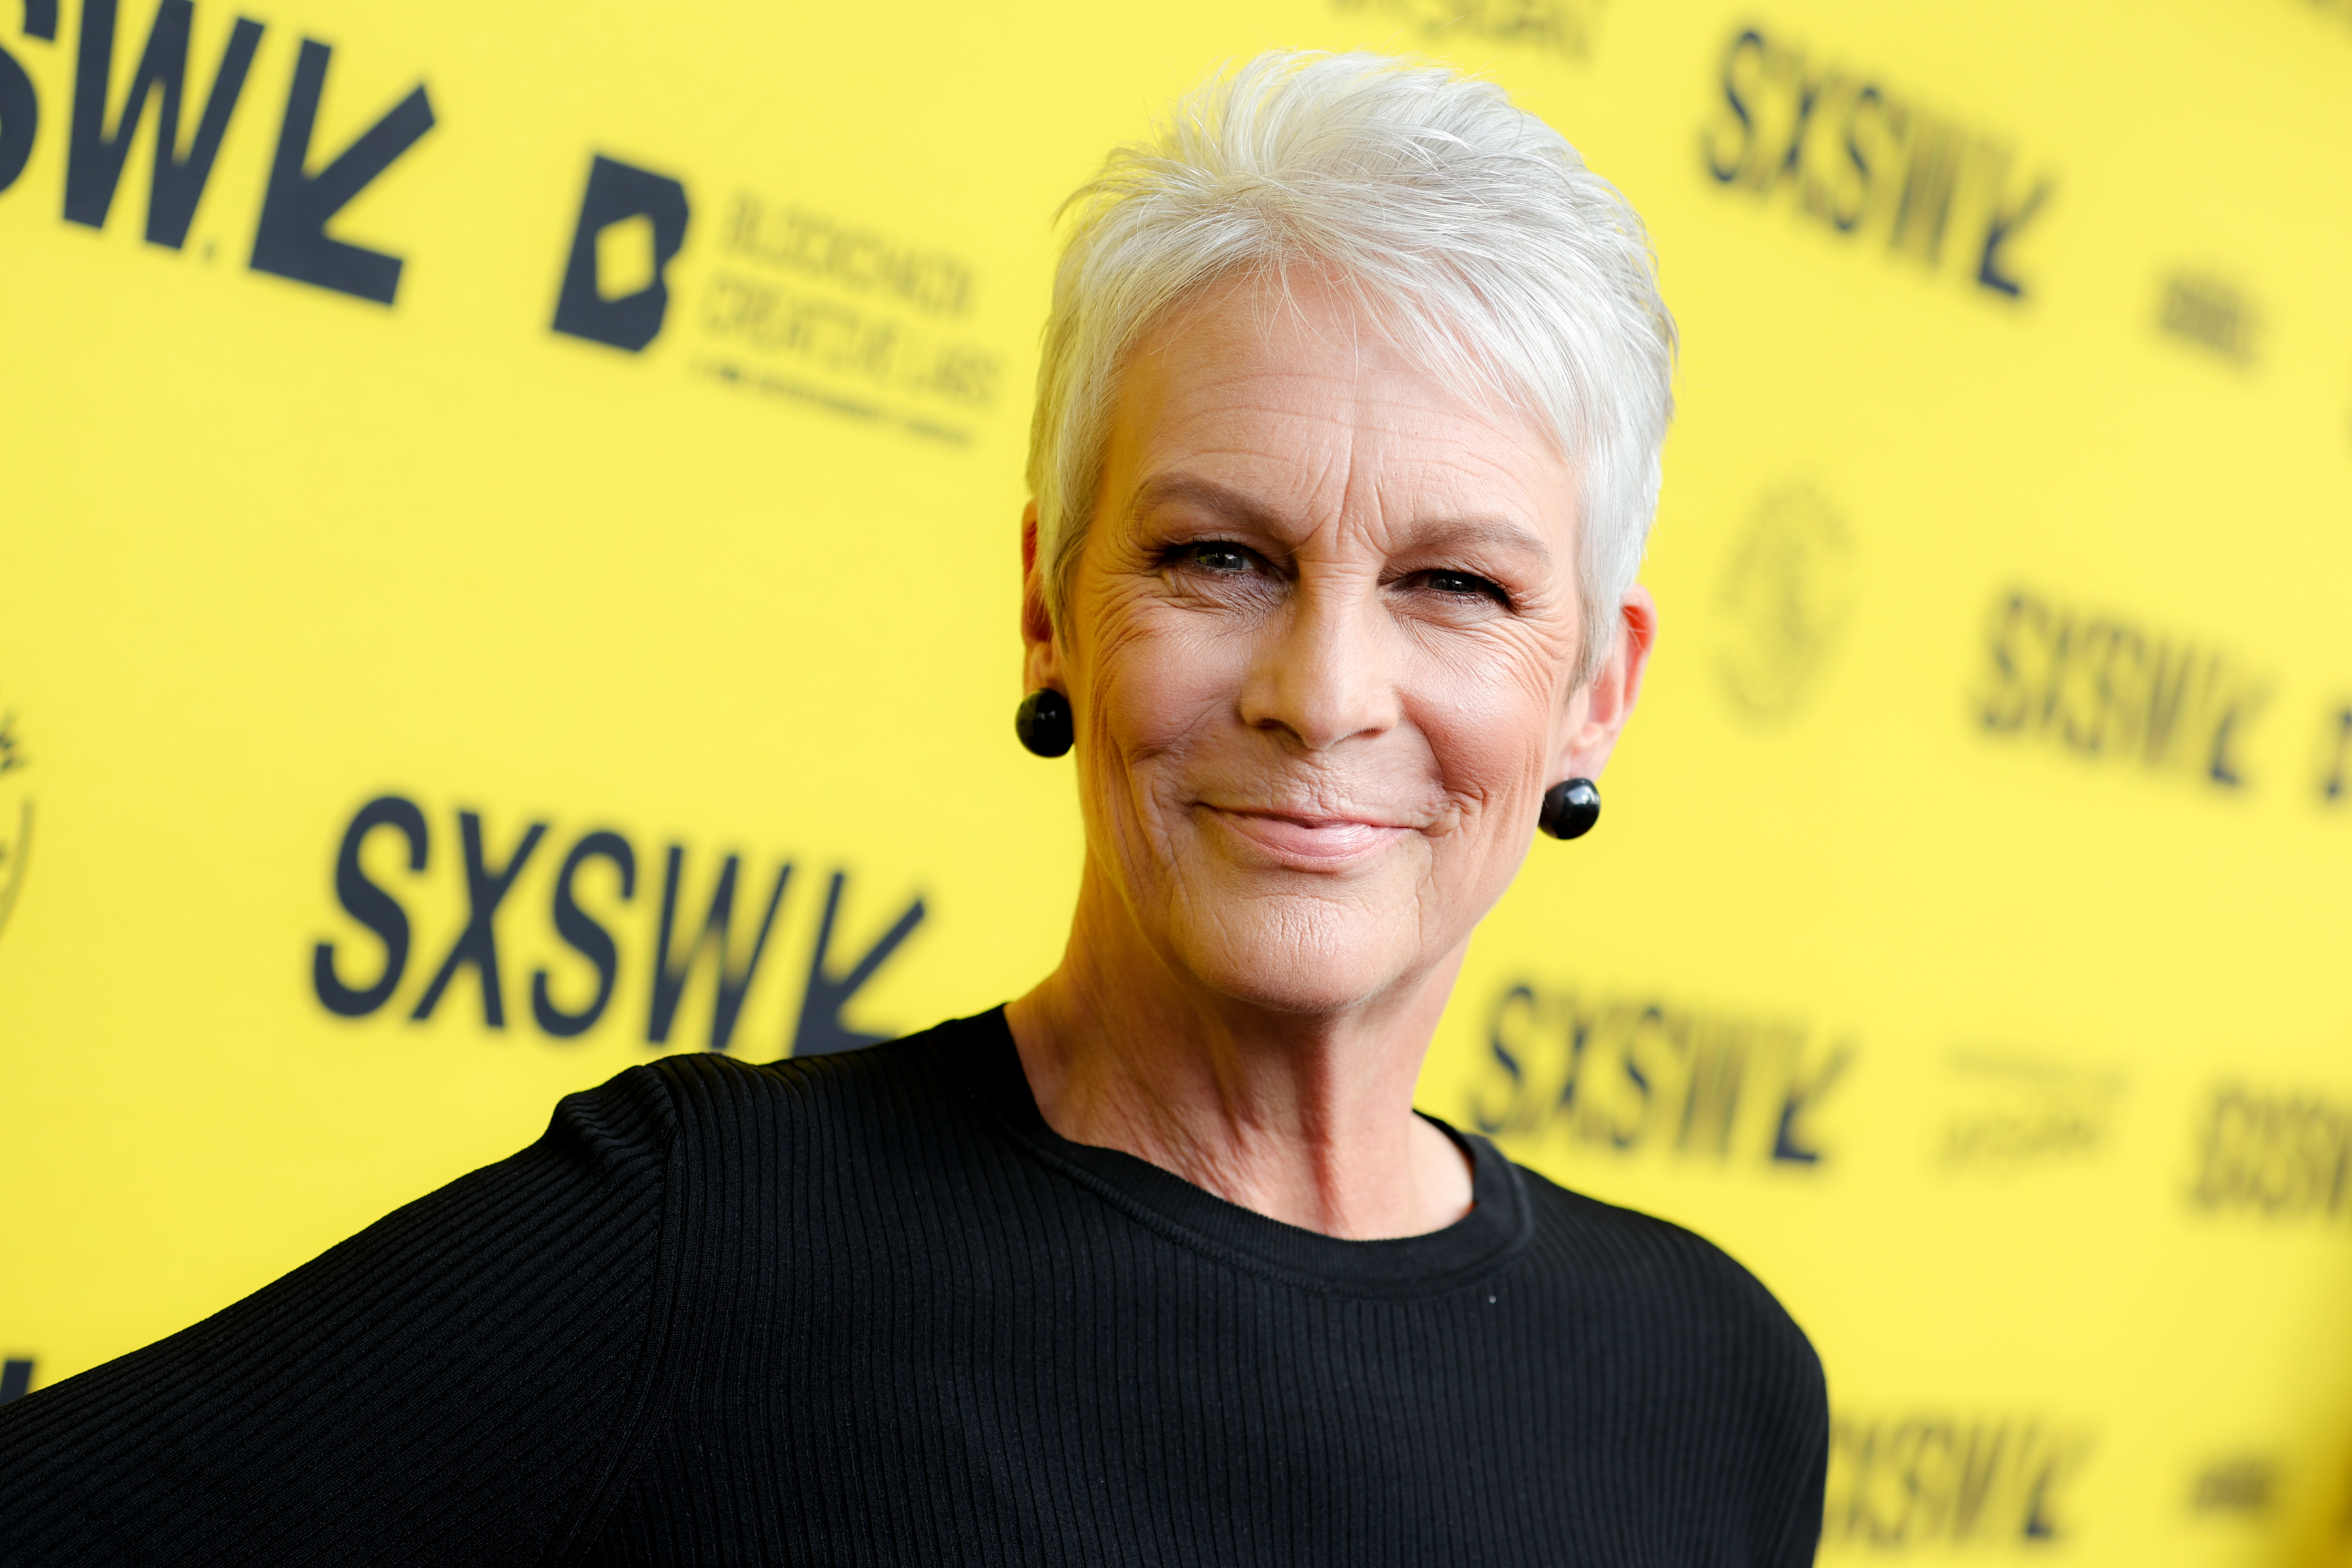 Jamie Lee Curtis at the "Everything Everywhere All At Once" Premiere in 2022 | Source: Getty Images